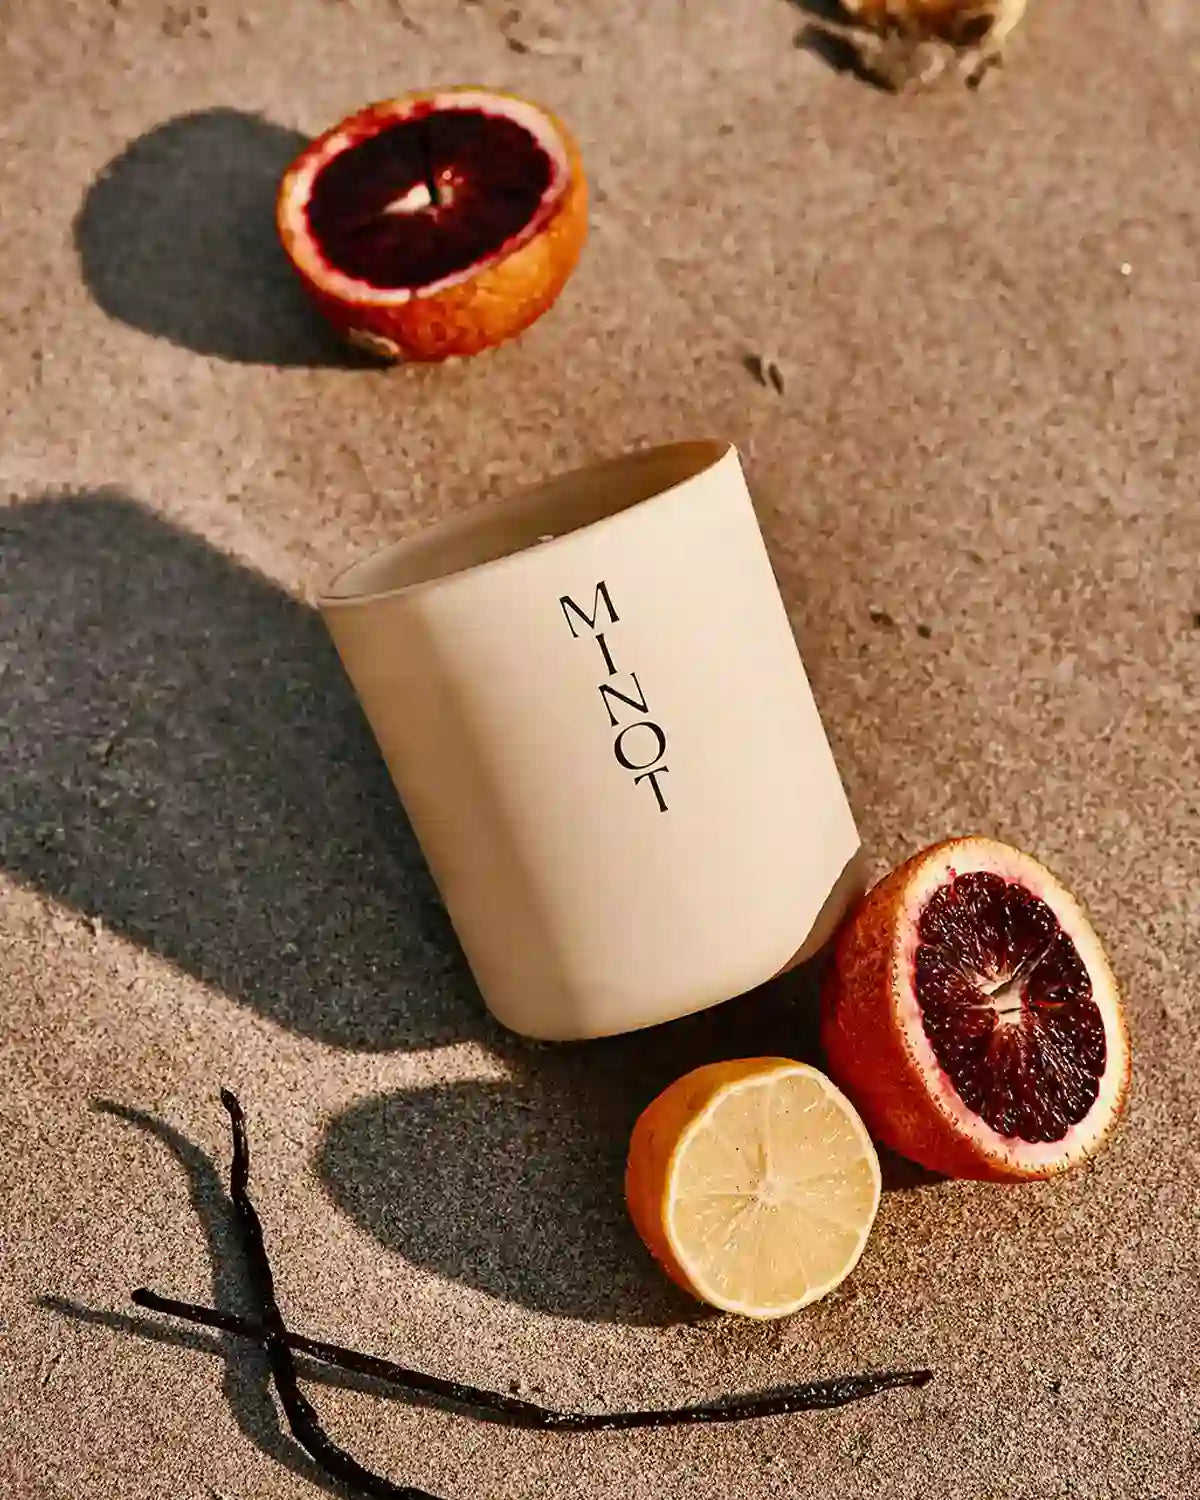 The Sunbeam freesia candle is nestled in beach sand next to vanilla beans, lemons, and blood oranges